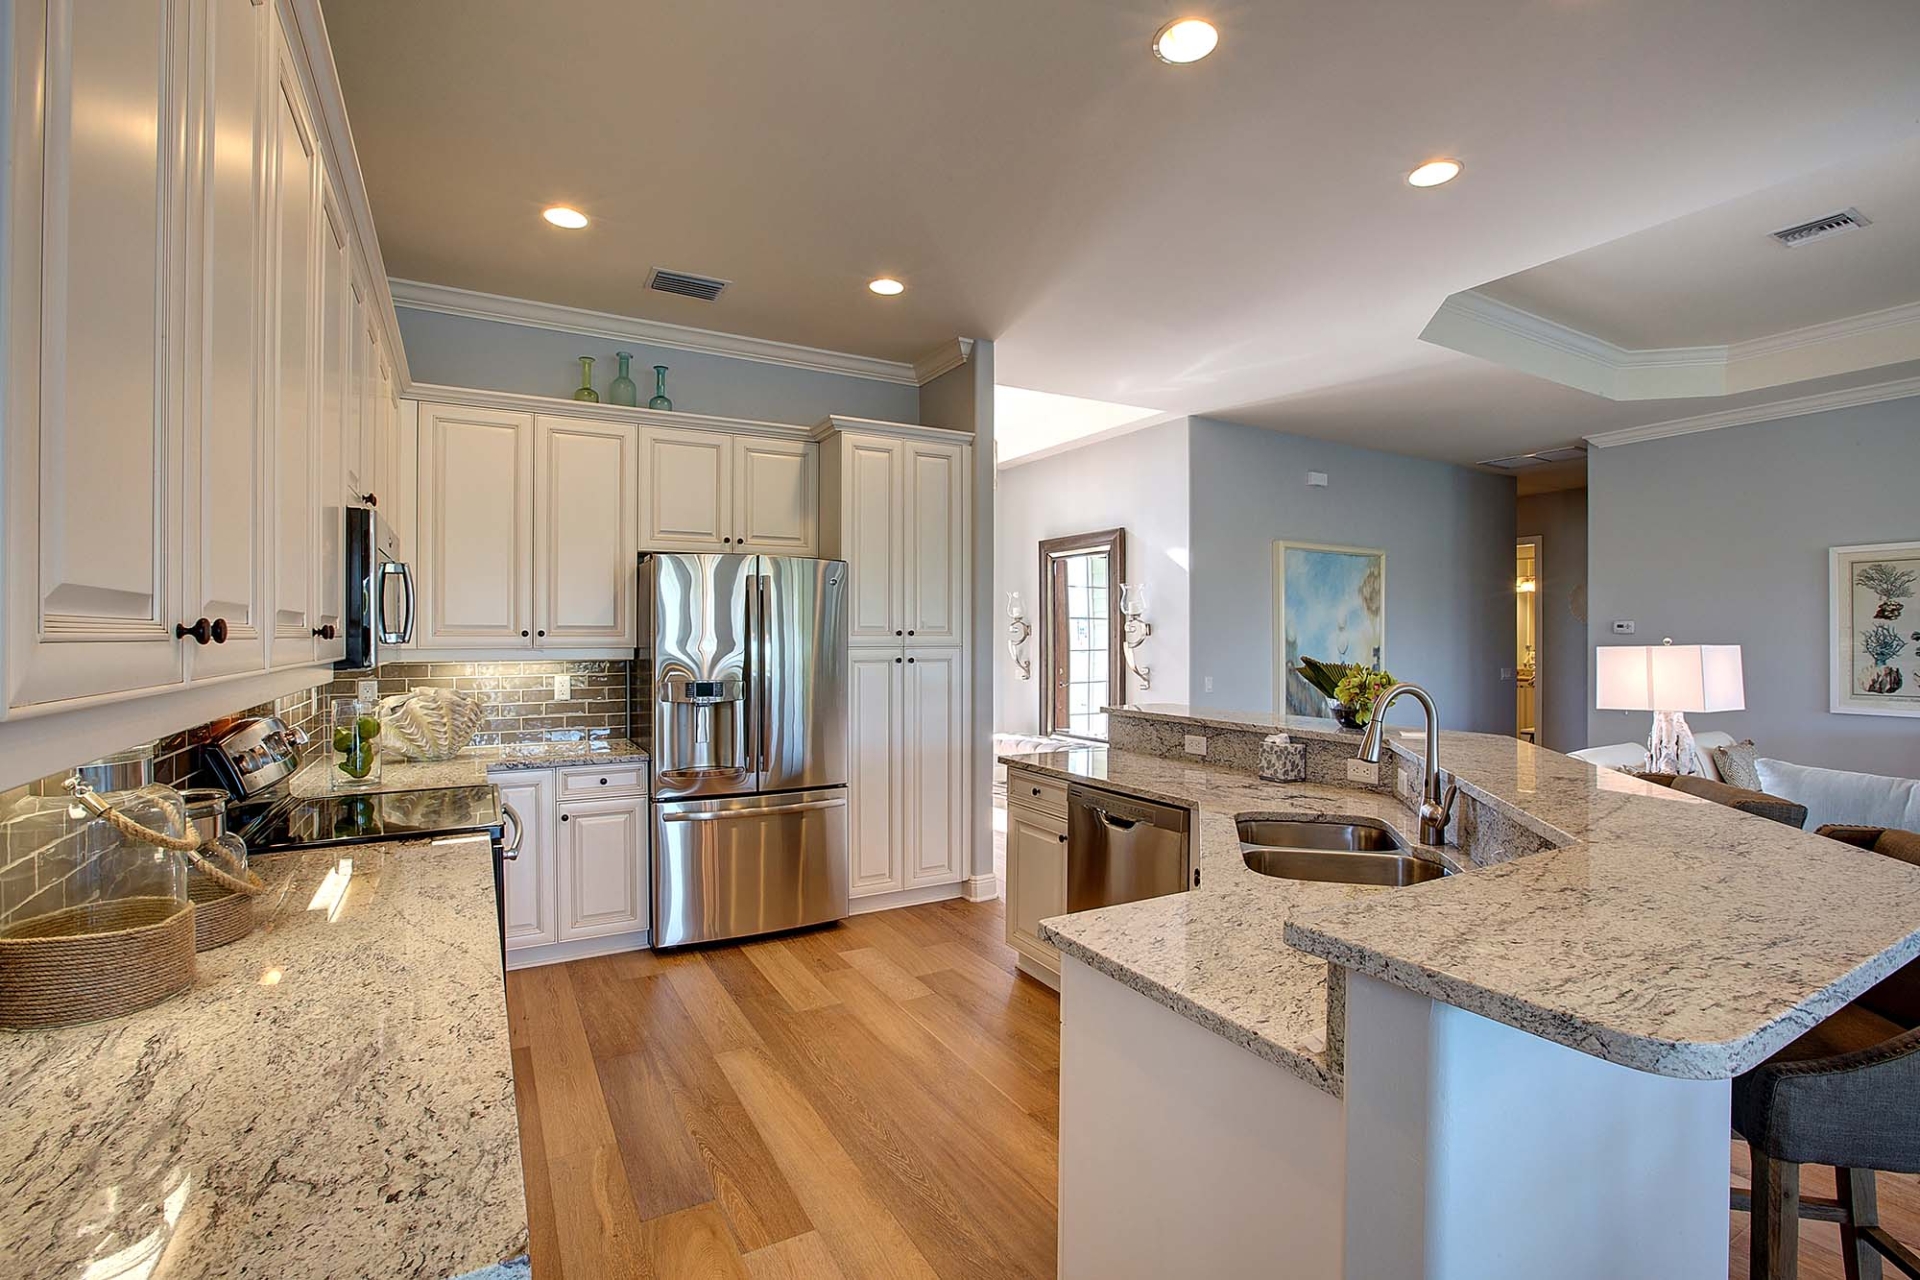 The kitchen in the Sanibel Model Home at Shell Point Retirement Community